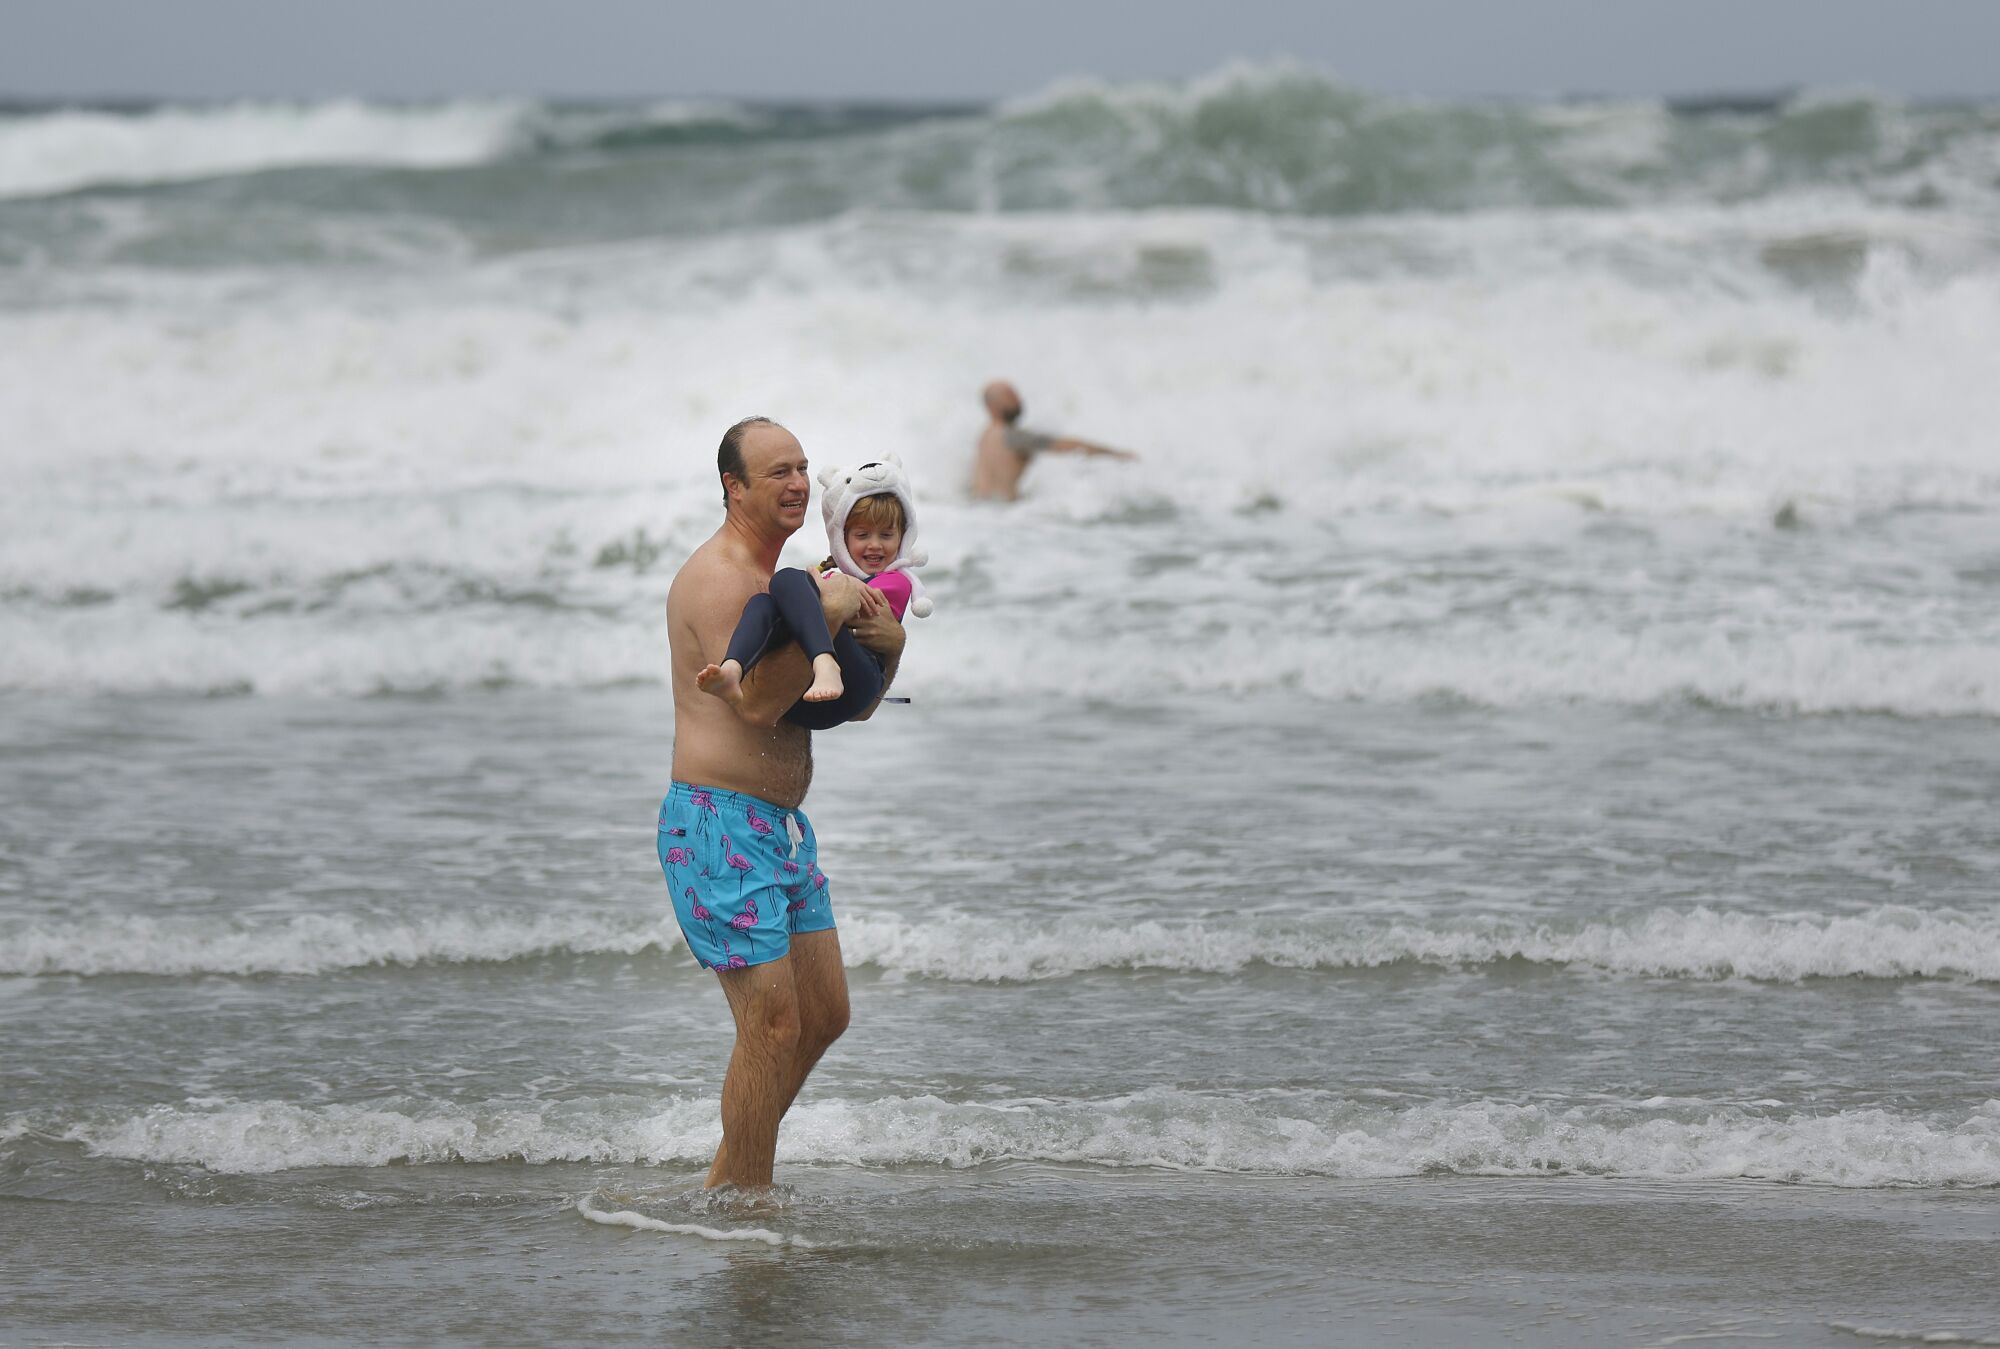 Mike Strickland holds his daughter Emily during the New Year's Polar Bear Plunge at La Jolla Shores.